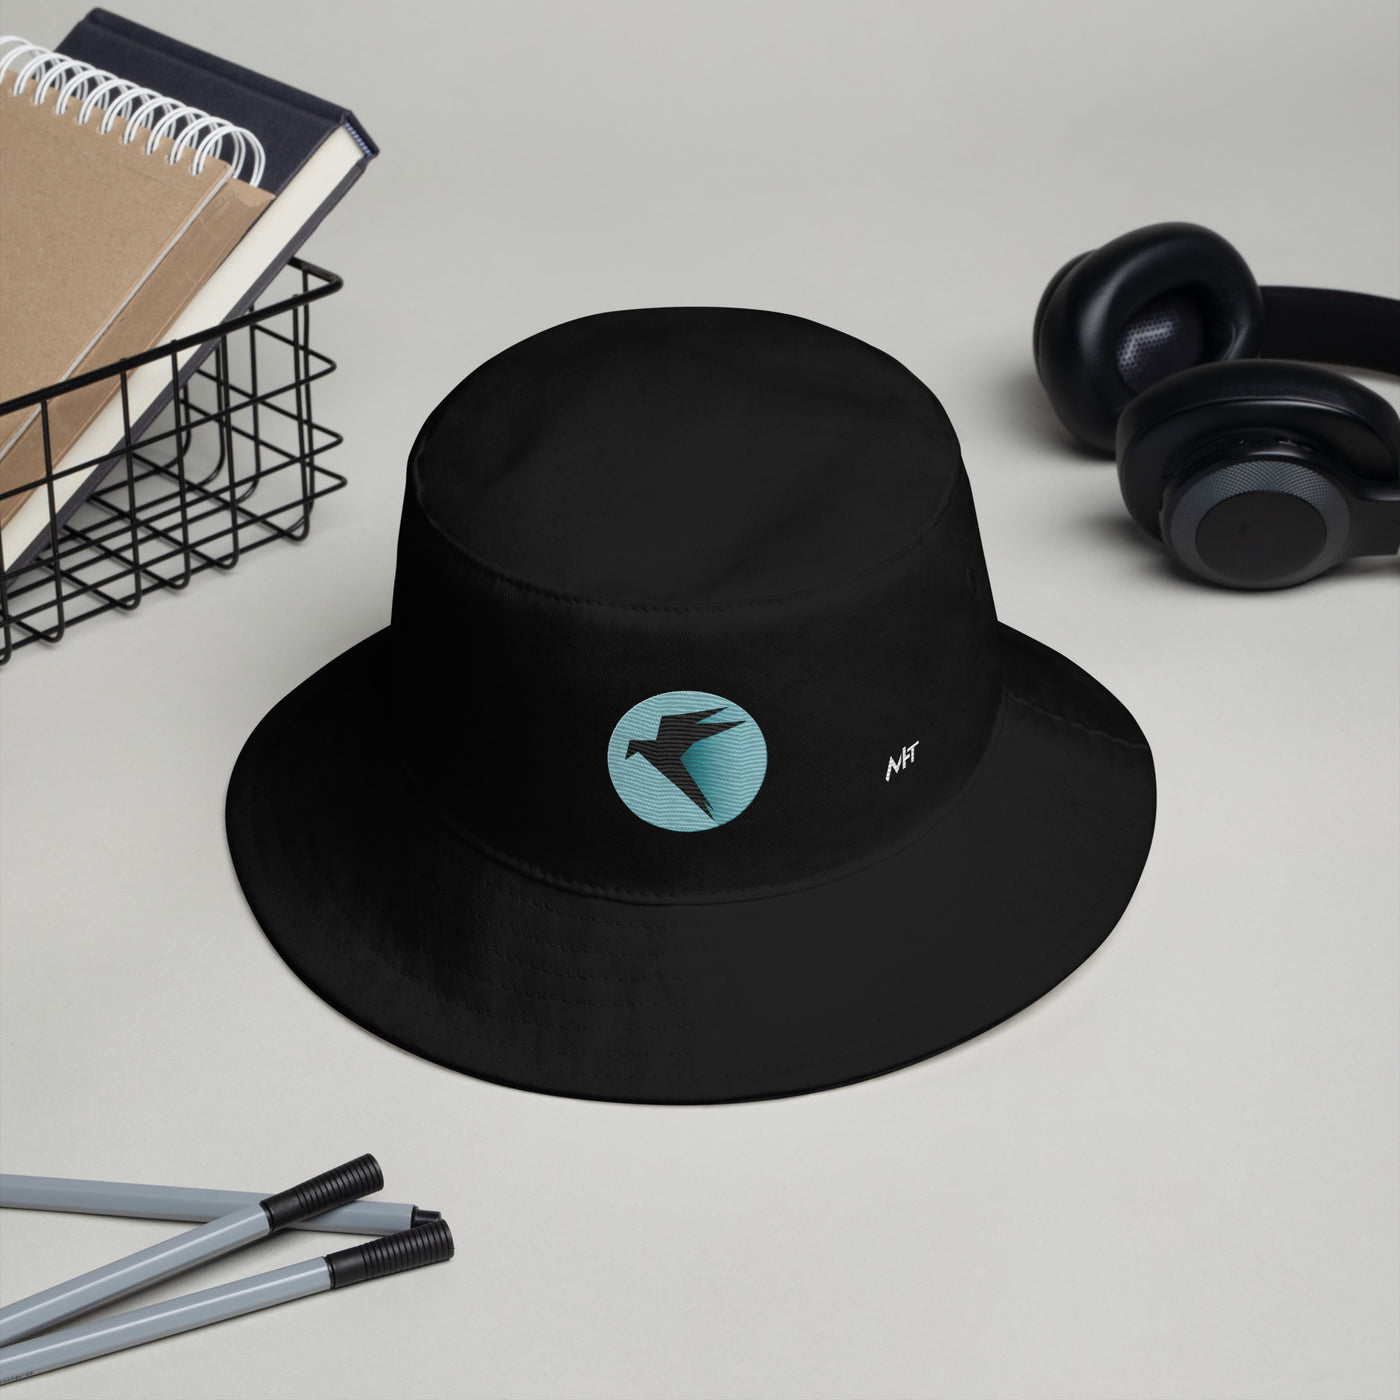 Parrot OS - The operating system for Hackers - Bucket Hat